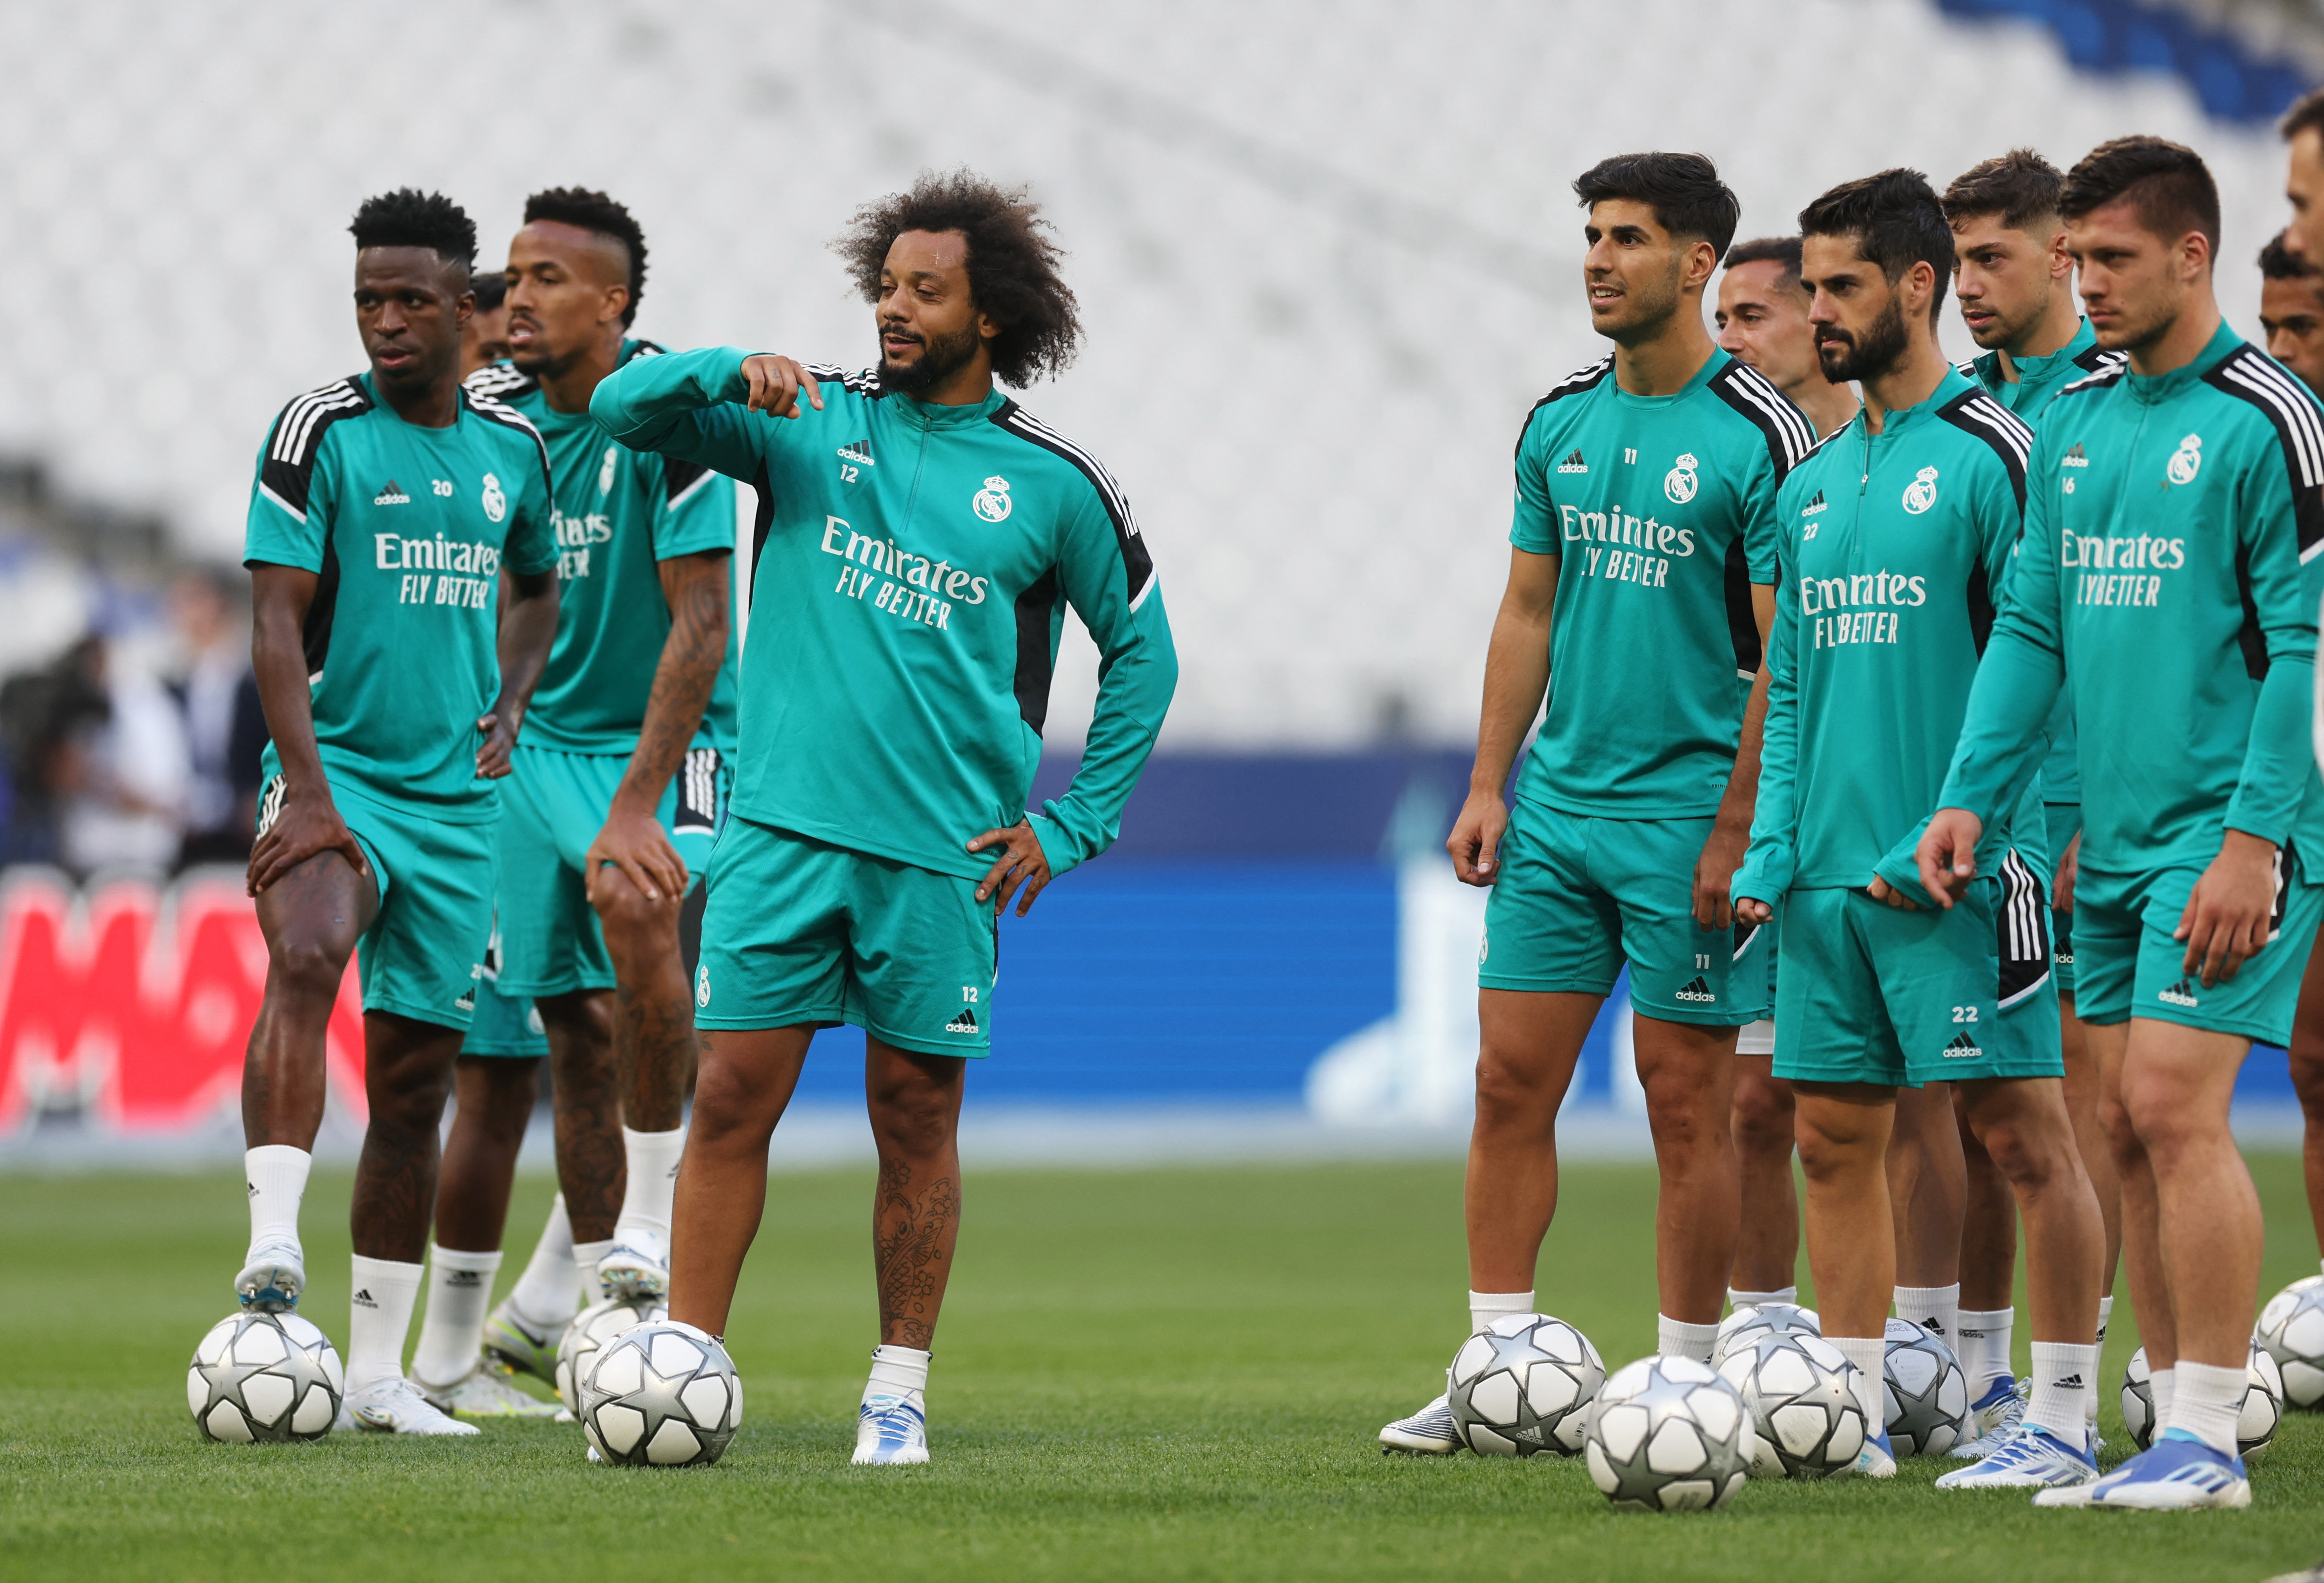 Soccer Football - Champions League - Champions League Final - Real Madrid Training - Stade de France, Saint-Denis near Paris, France - May 27, 2022 Real Madrid's Marcelo and teammates during training REUTERS/Lee Smith